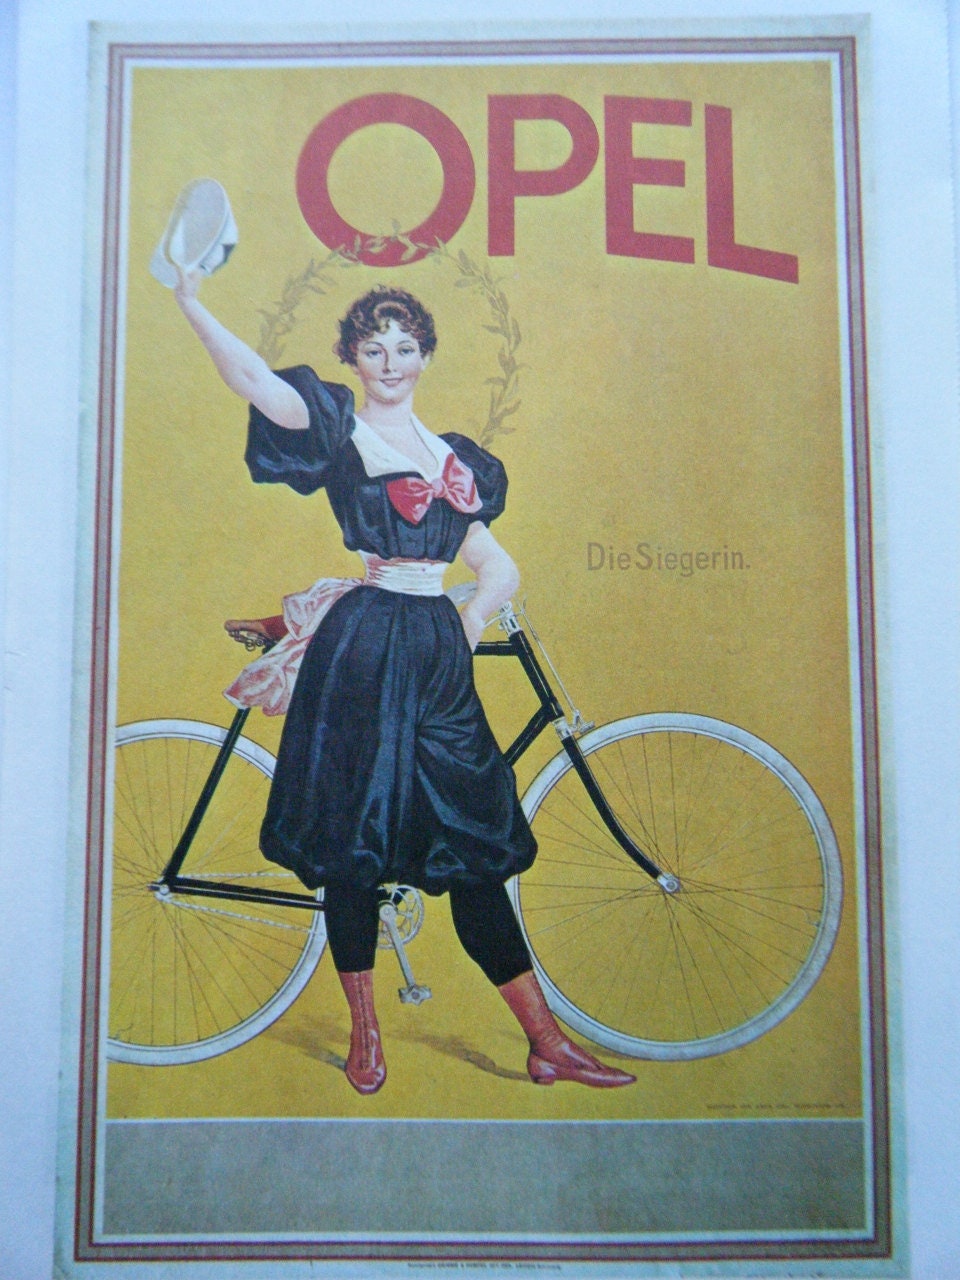 VINTAGE LA CHAINE SIMPSON FRENCH BICYCLE ADVERTISING A2 POSTER PRINT